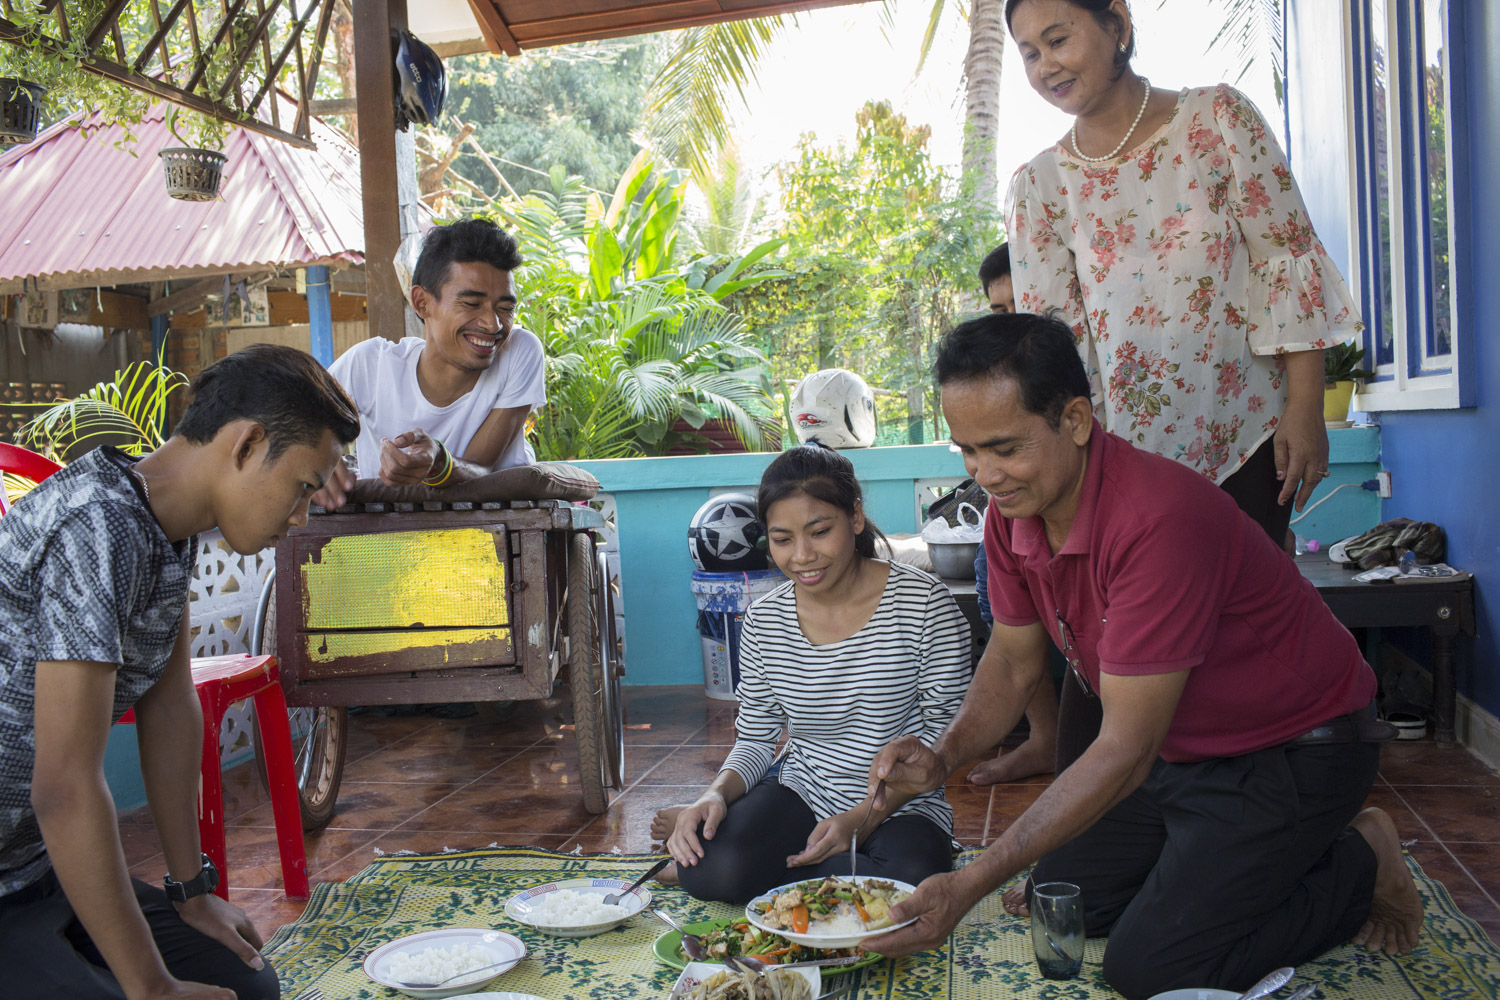 When Sophanna was staying at an orphanage in Siem Reap, a local Christian couple took him in as part of their family. Even after he moved to live with friends at a music school, they invite him over for meals at their home from time to time.